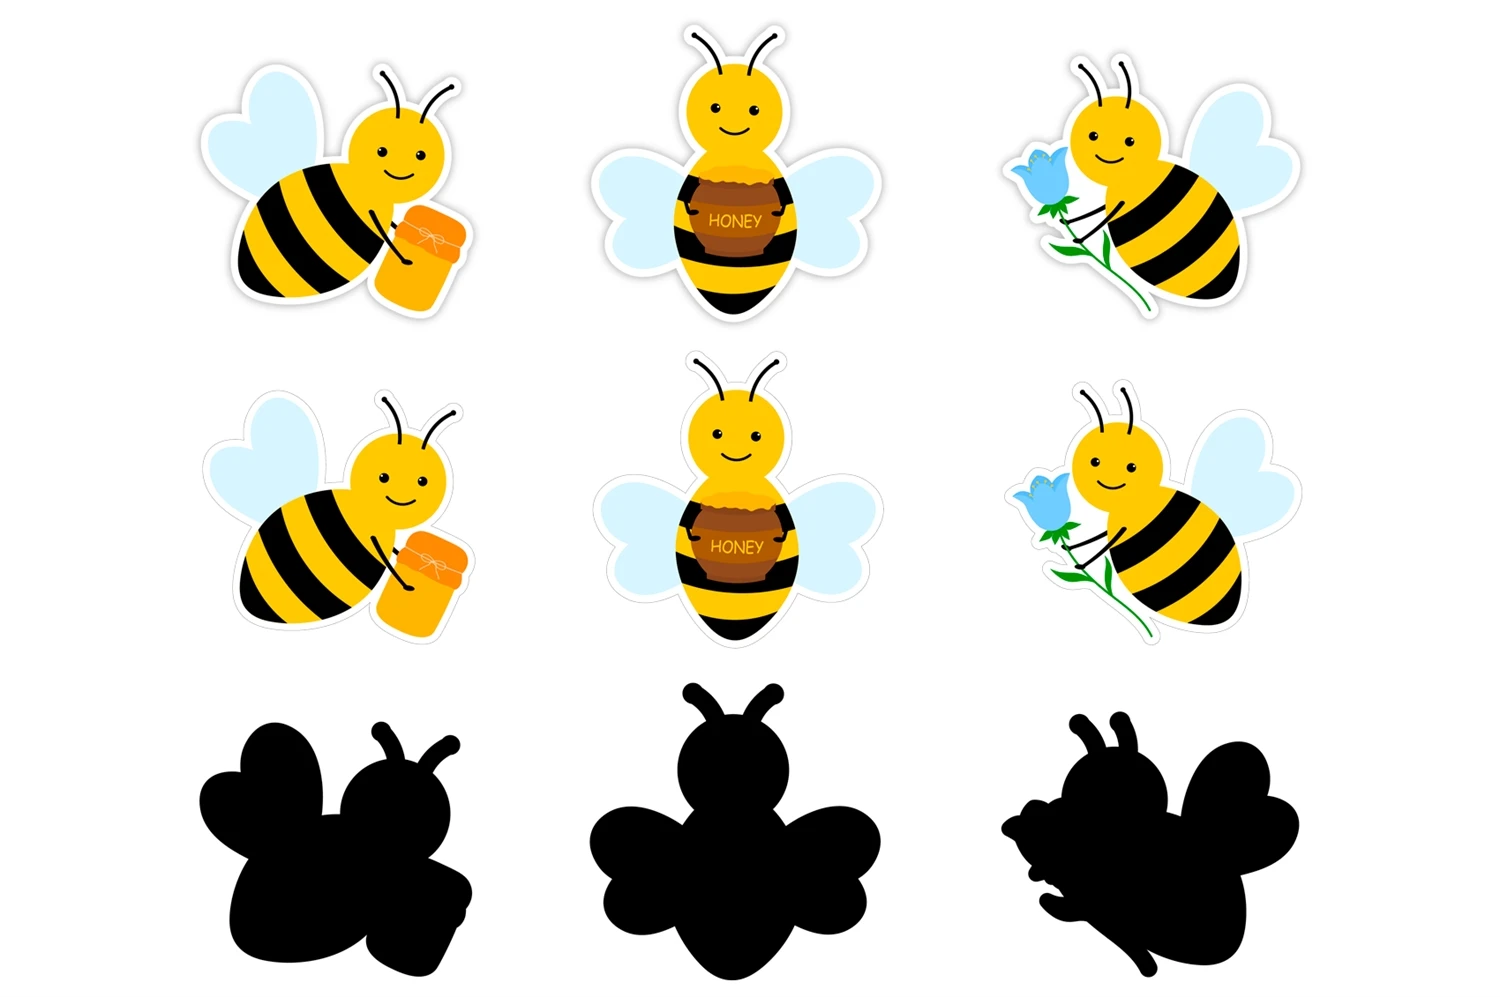 Bees stickers PNG. Bees stickers printable. Bees bundle By IrinaShishkova